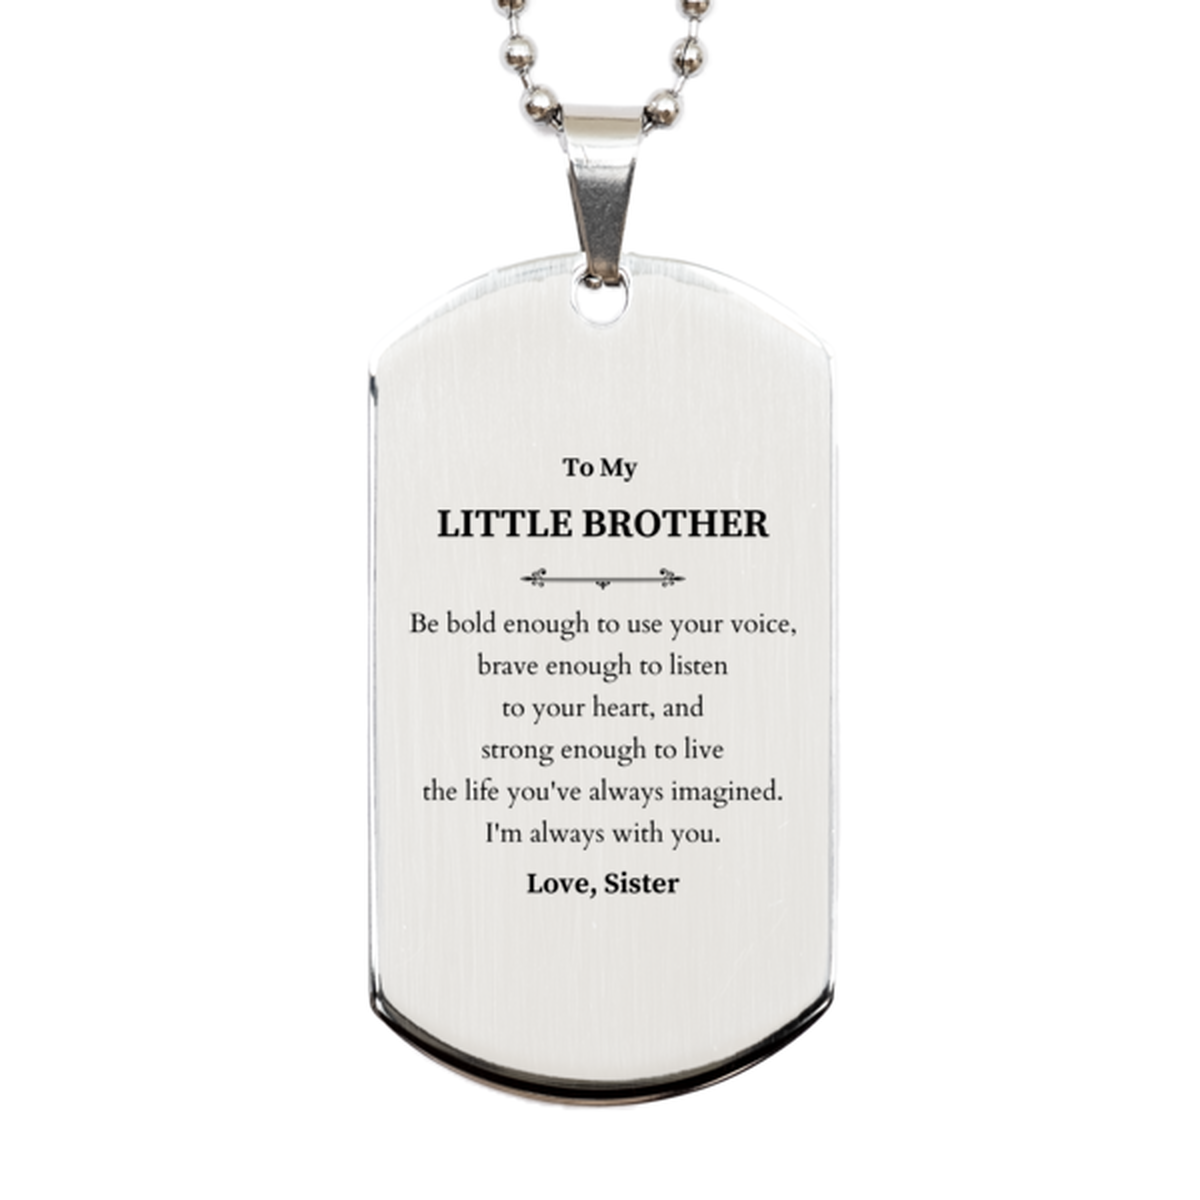 Keepsake Little Brother Silver Dog Tag Gift Idea Graduation Christmas Birthday Little Brother from Sister, Little Brother Be bold enough to use your voice, brave enough to listen to your heart. Love, Sister